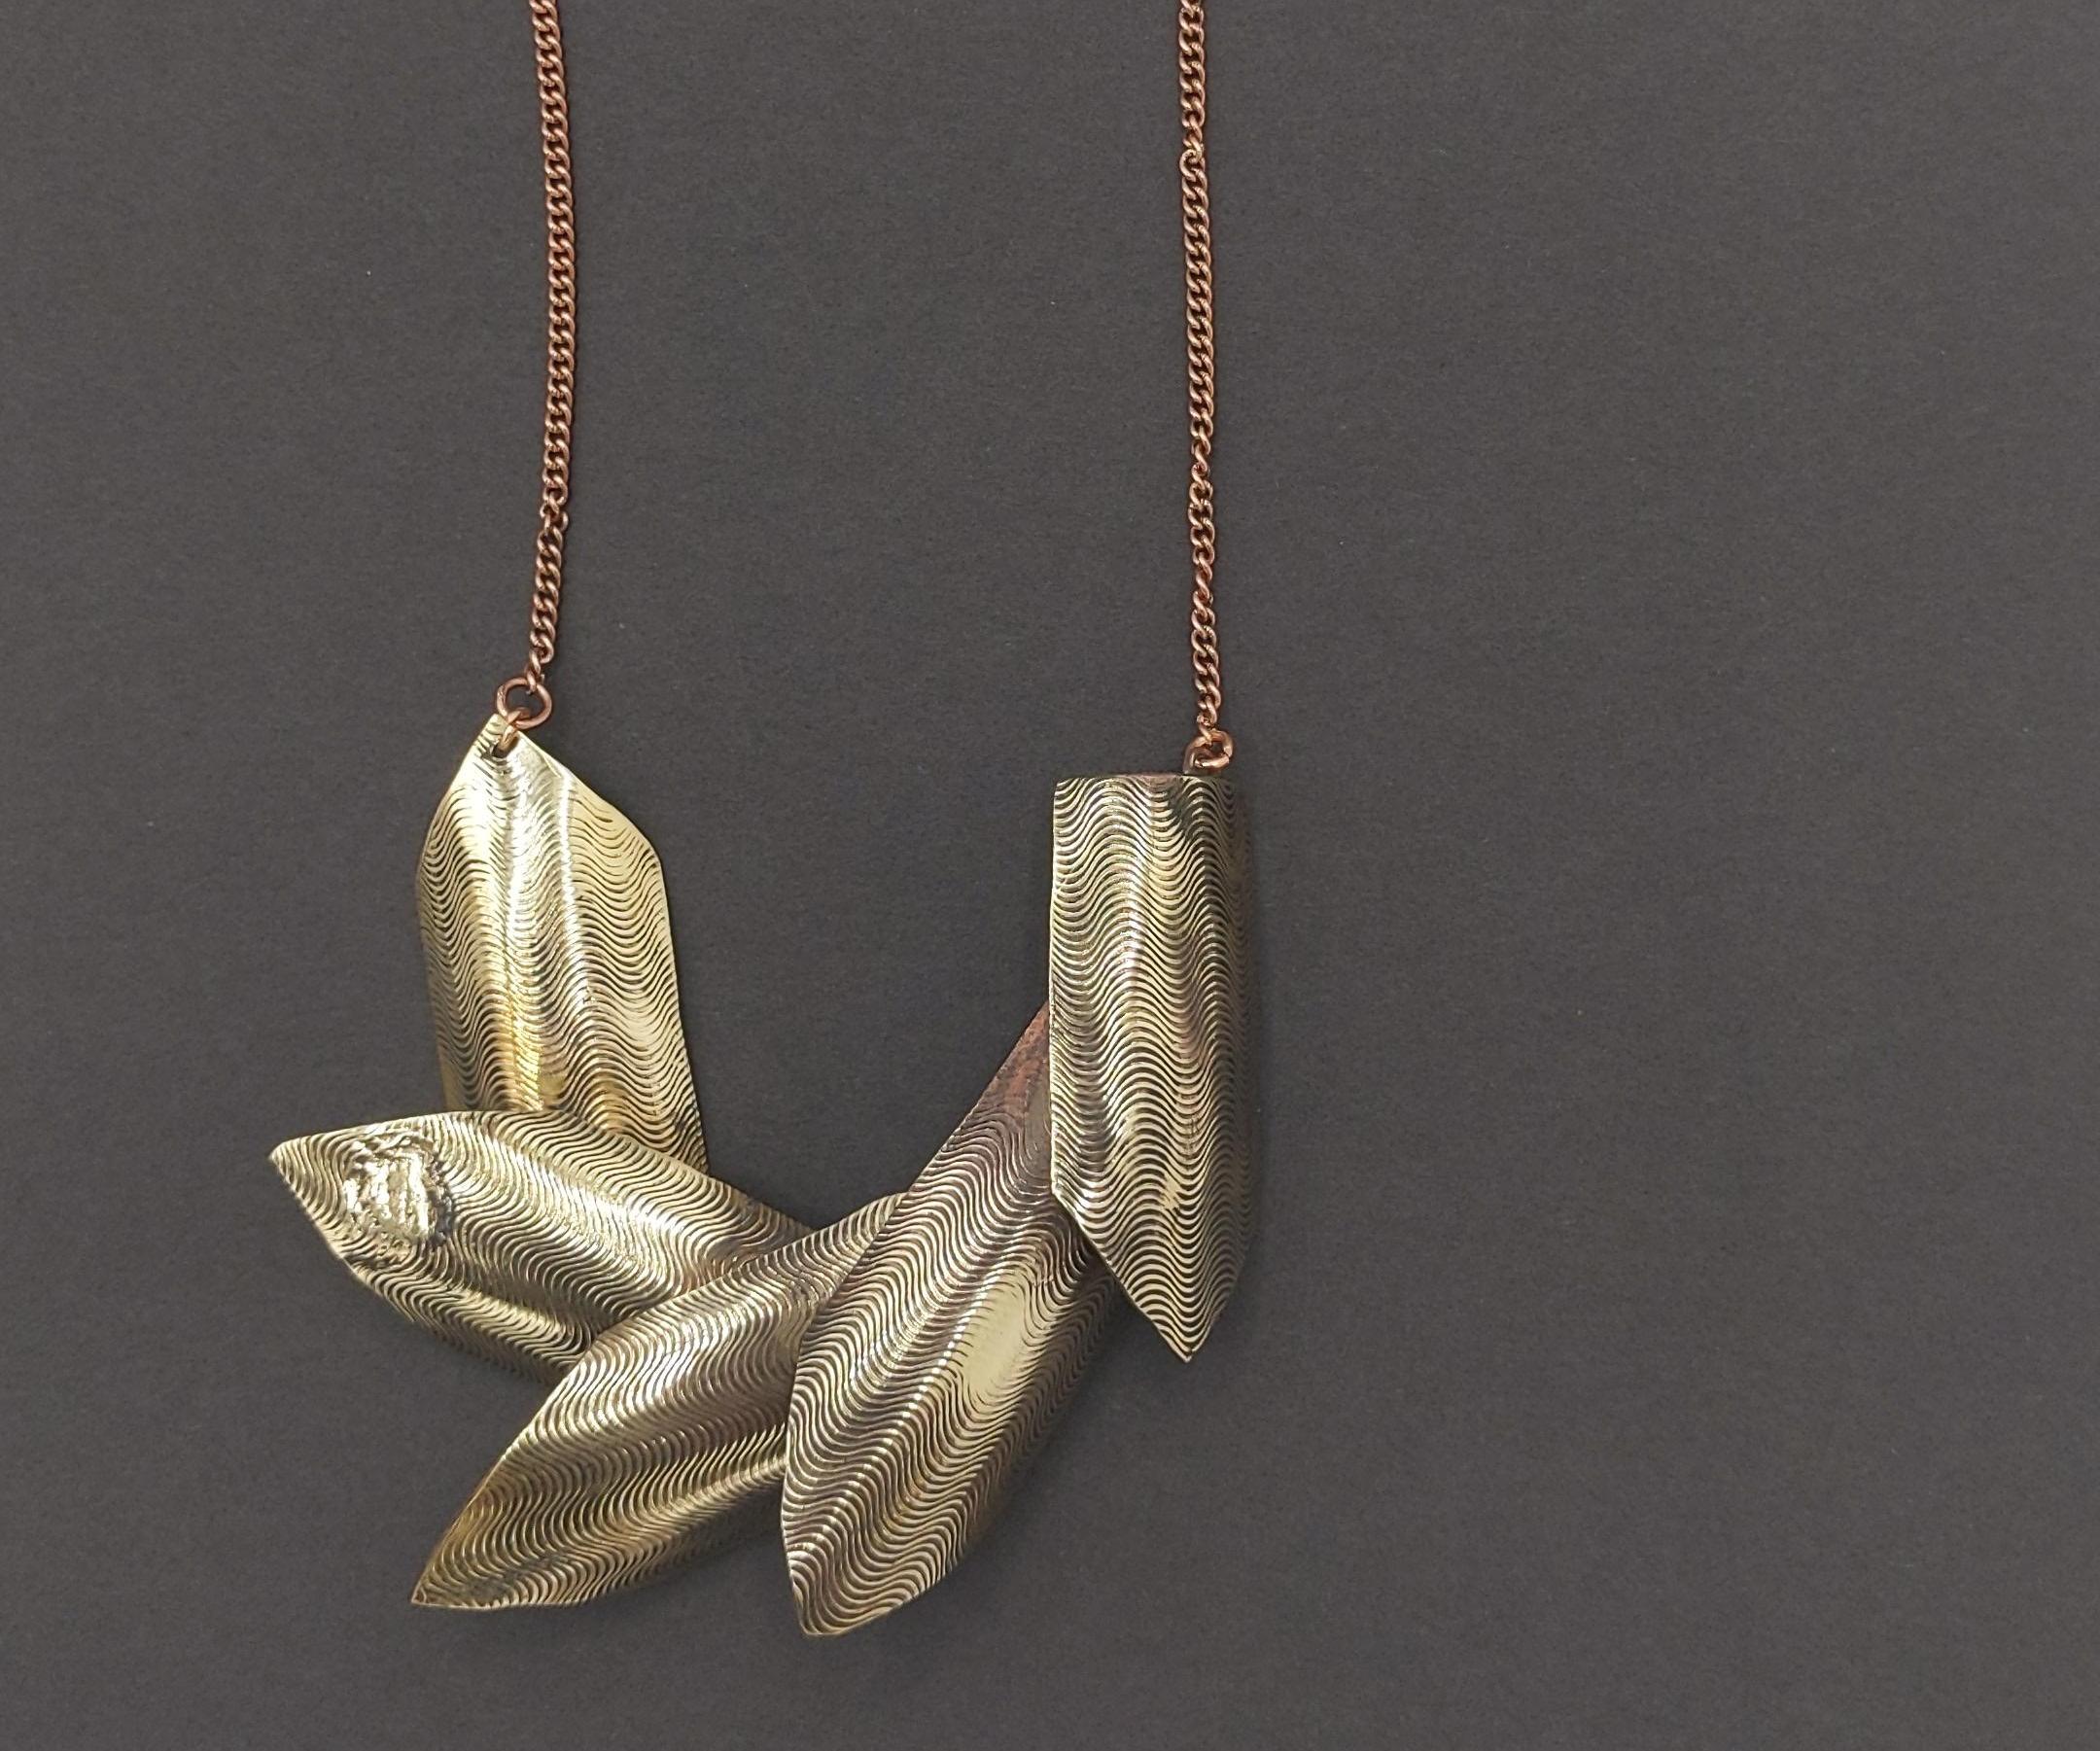 Linked Metal Fish Scale Necklace